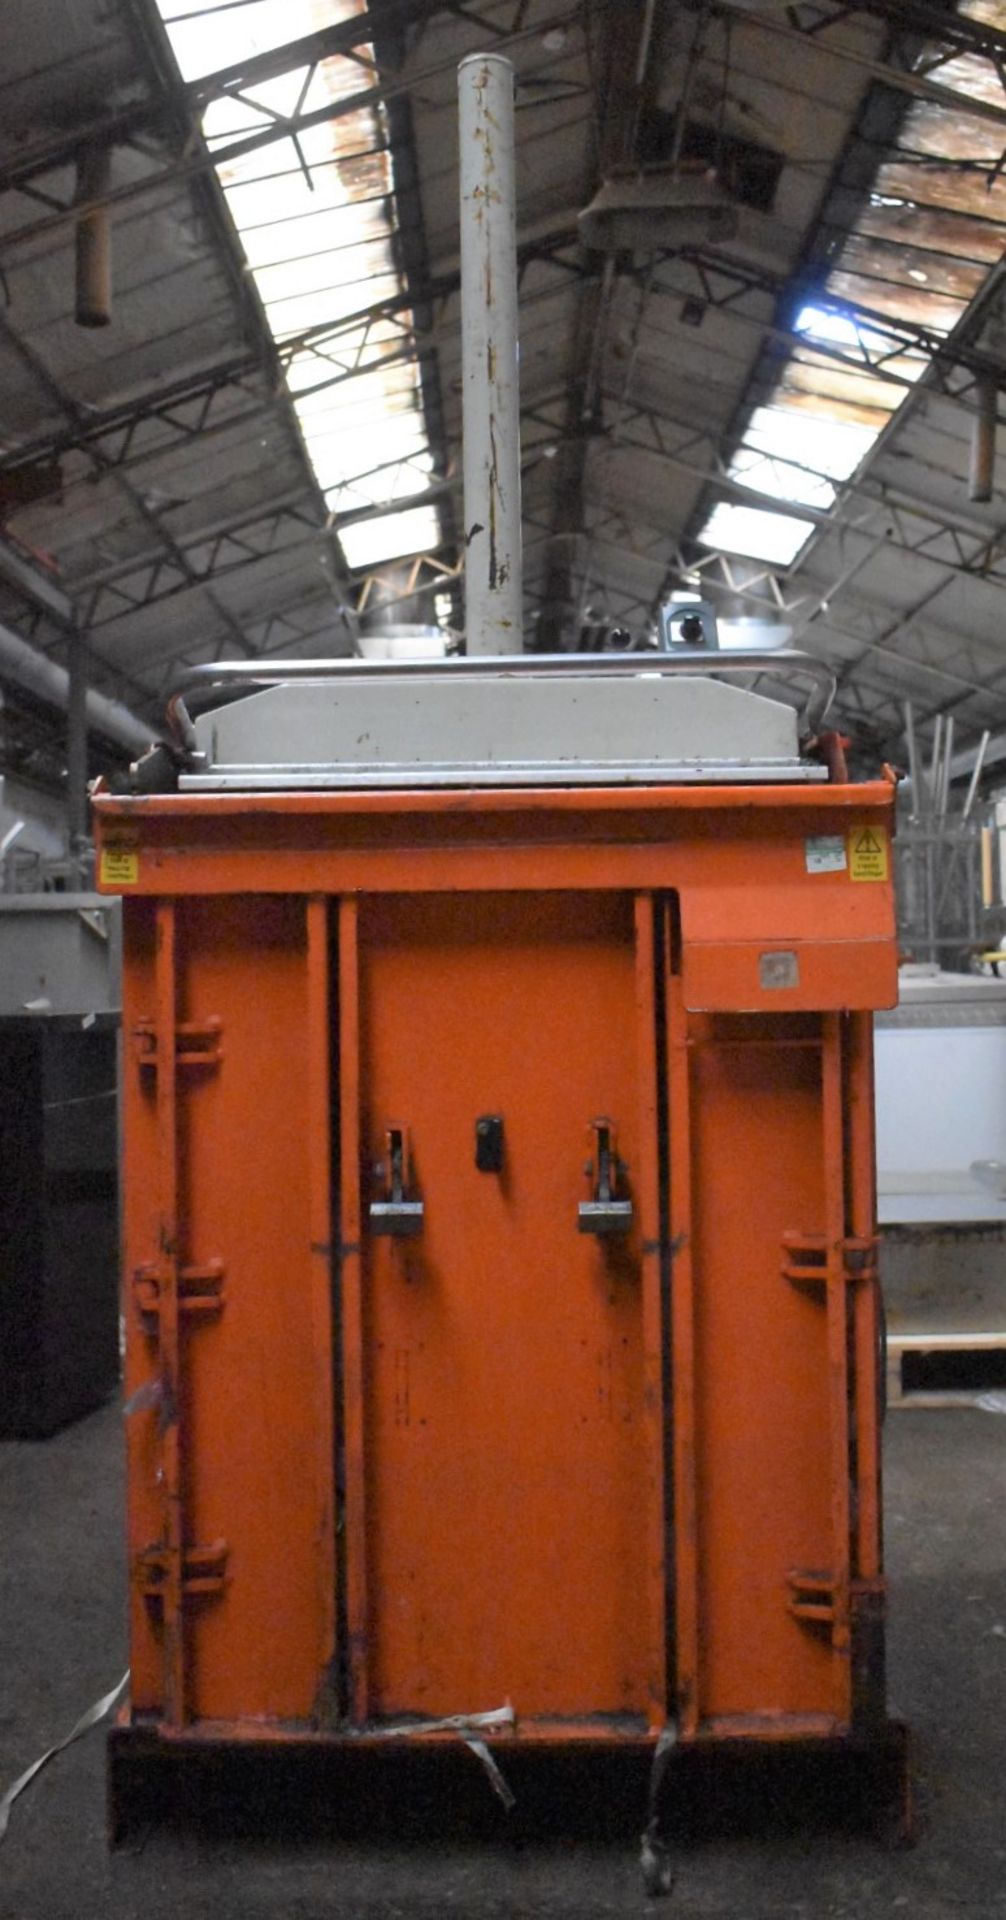 1 x Orwak 5010 Hydraulic Press Compact Cardboard Baler - Used For Compacting Recyclable or Non- - Image 5 of 15